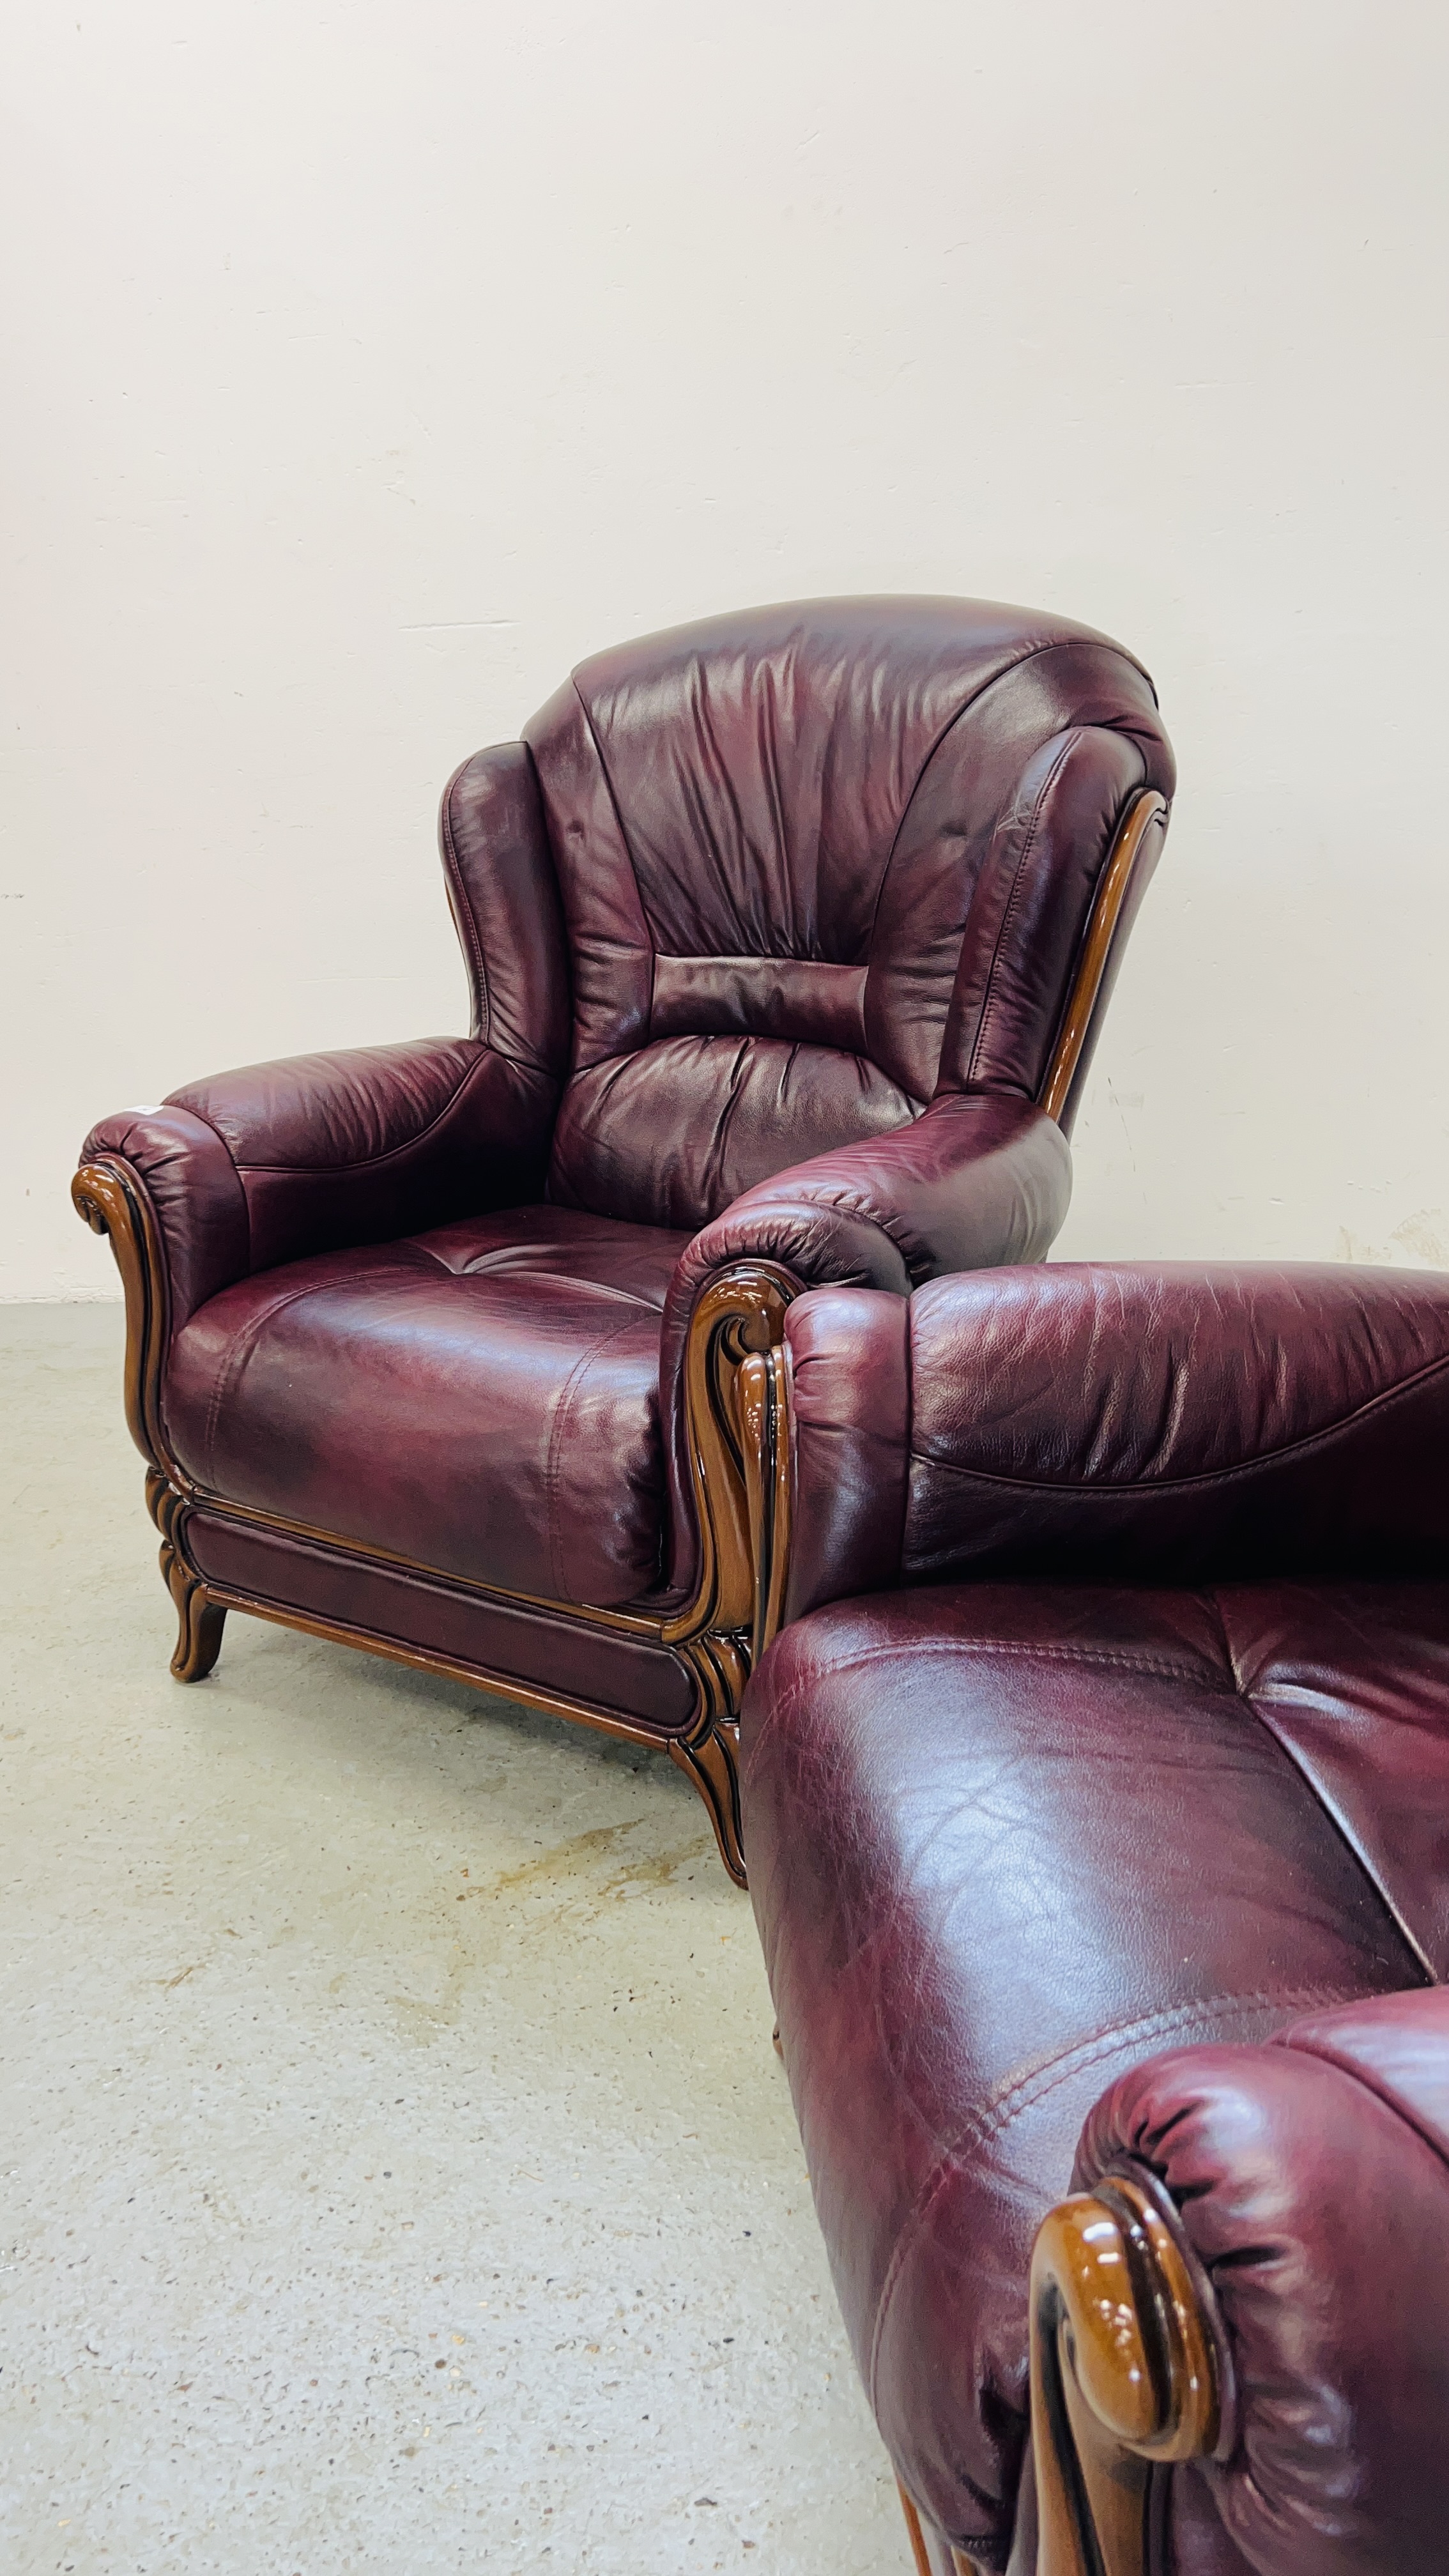 A PAIR OF GOOD QUALITY MODERN OXBLOOD LEATHER UPHOLSTERED EASY CHAIRS. - Image 8 of 8